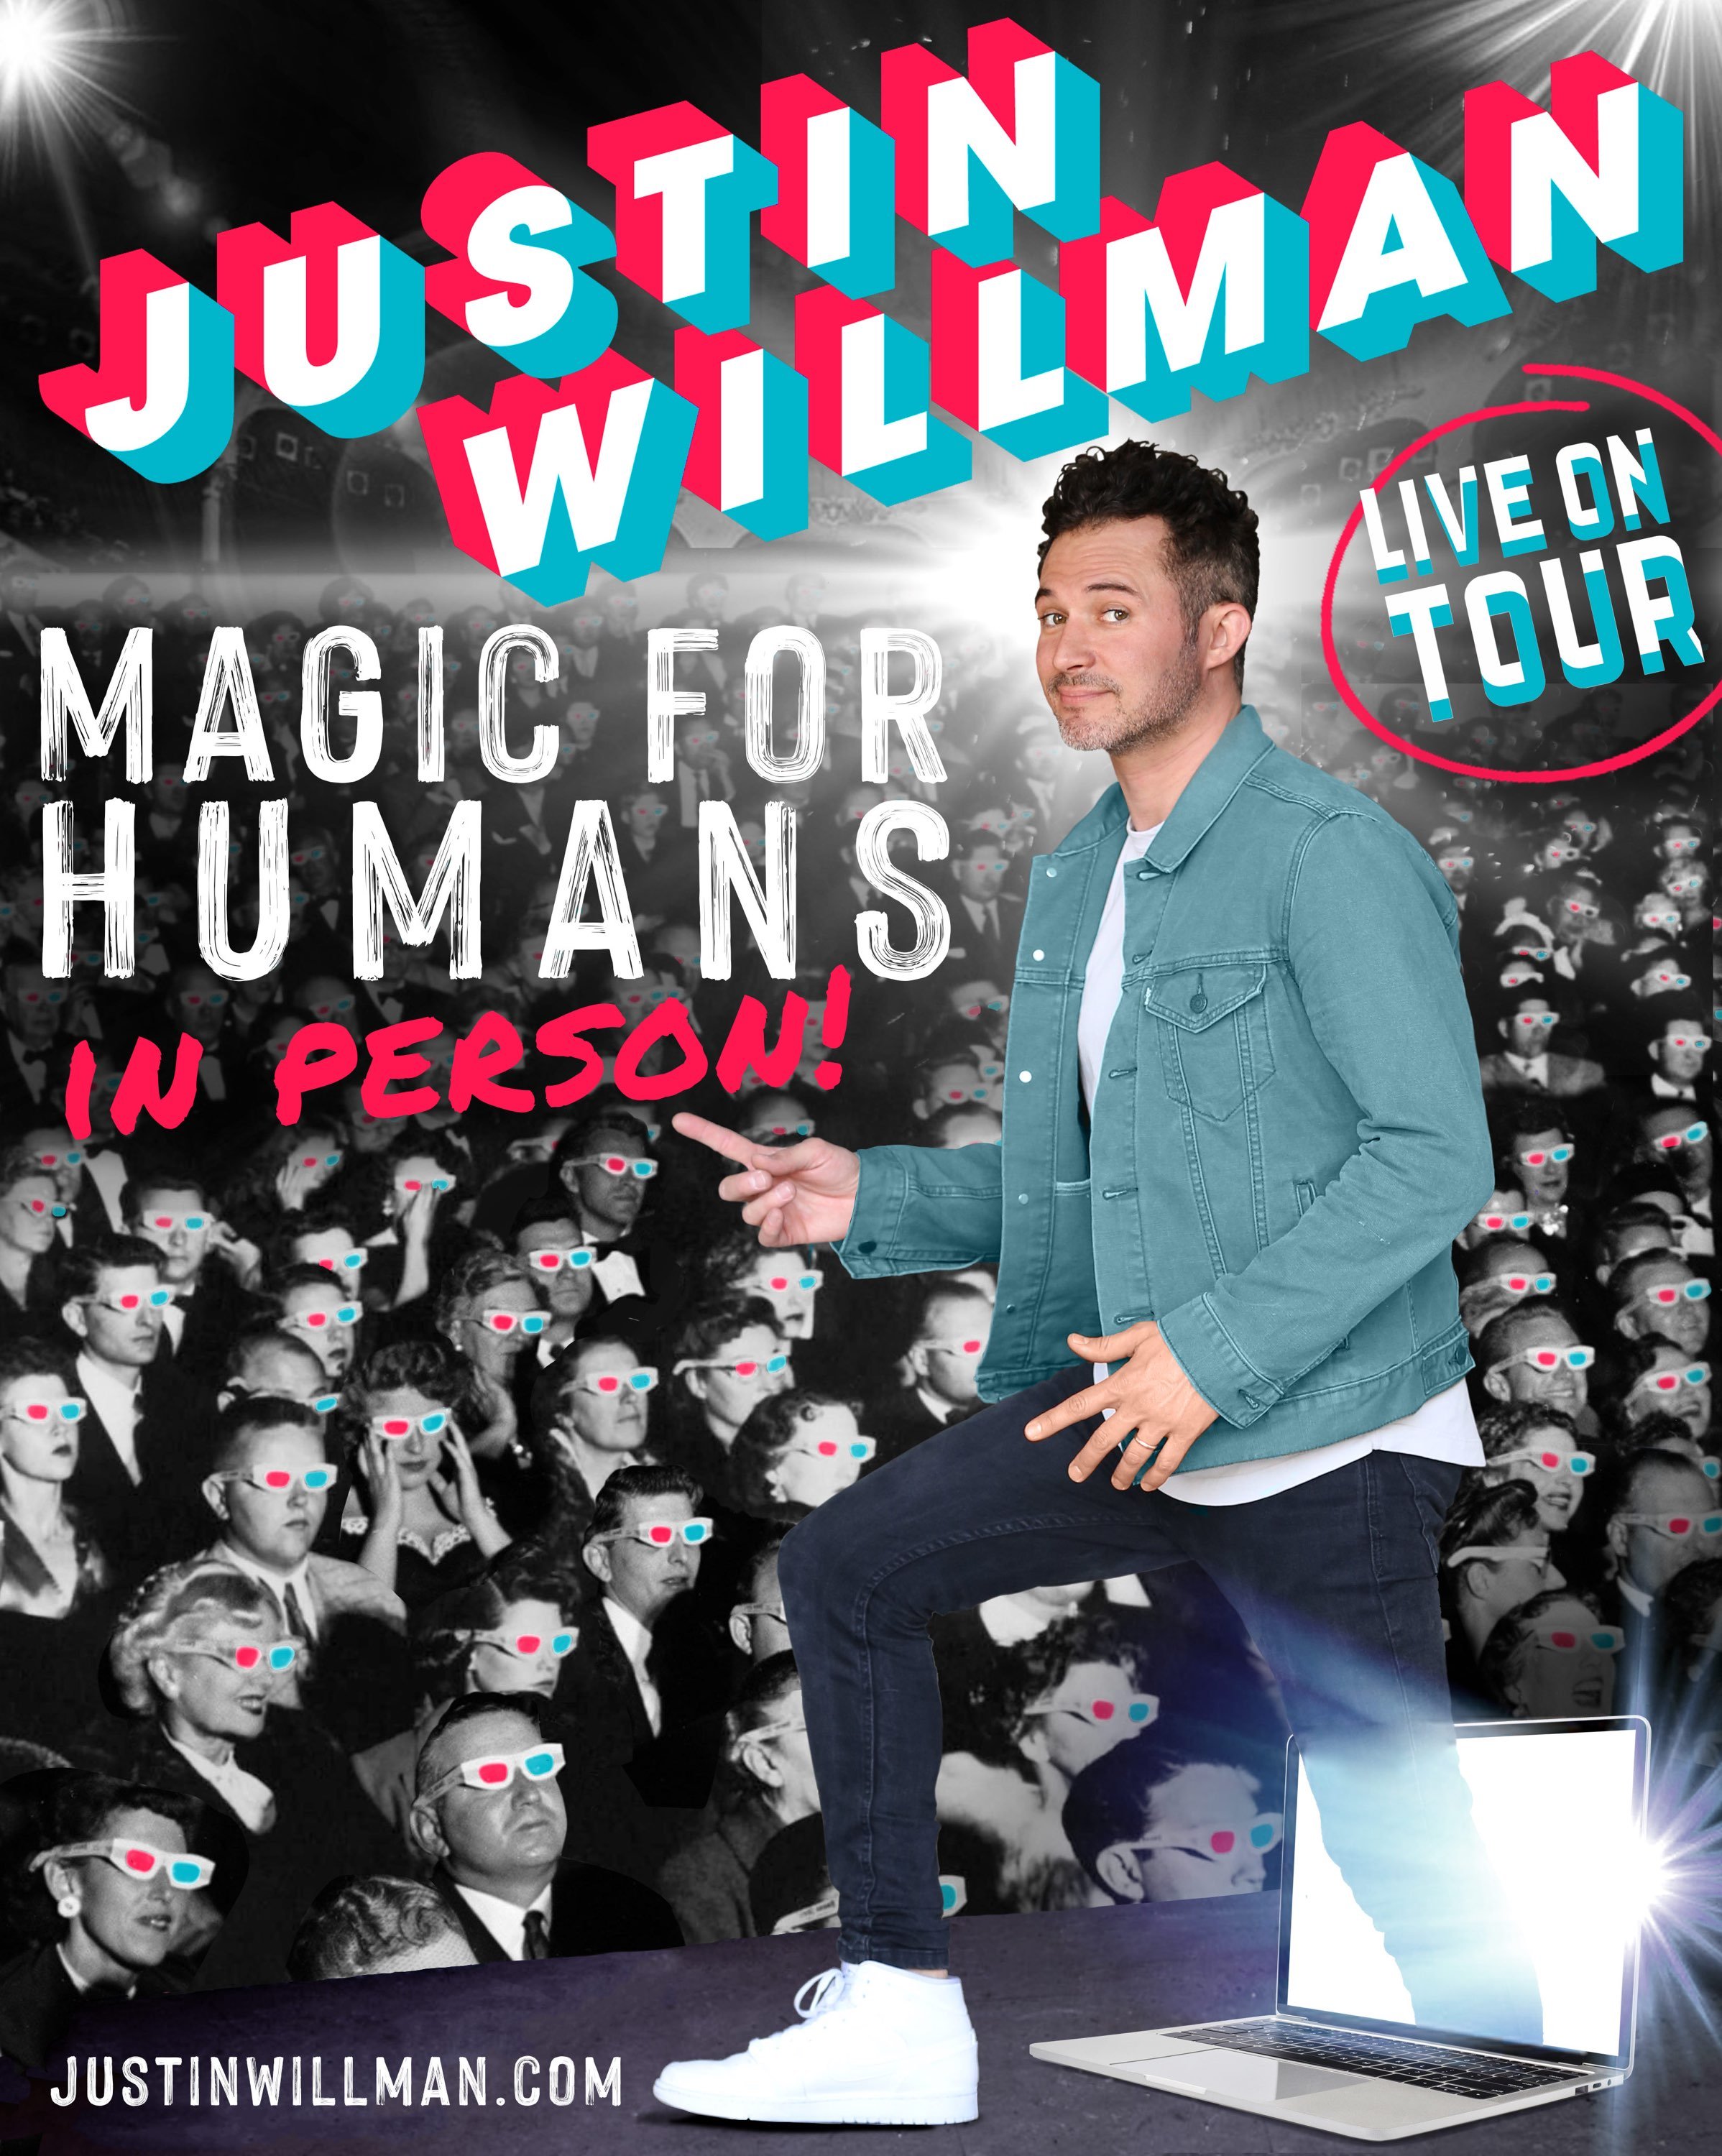 Nick Paul was on tour with Justin Willman opening the show and consulting on all magic in it from 2021-2022.